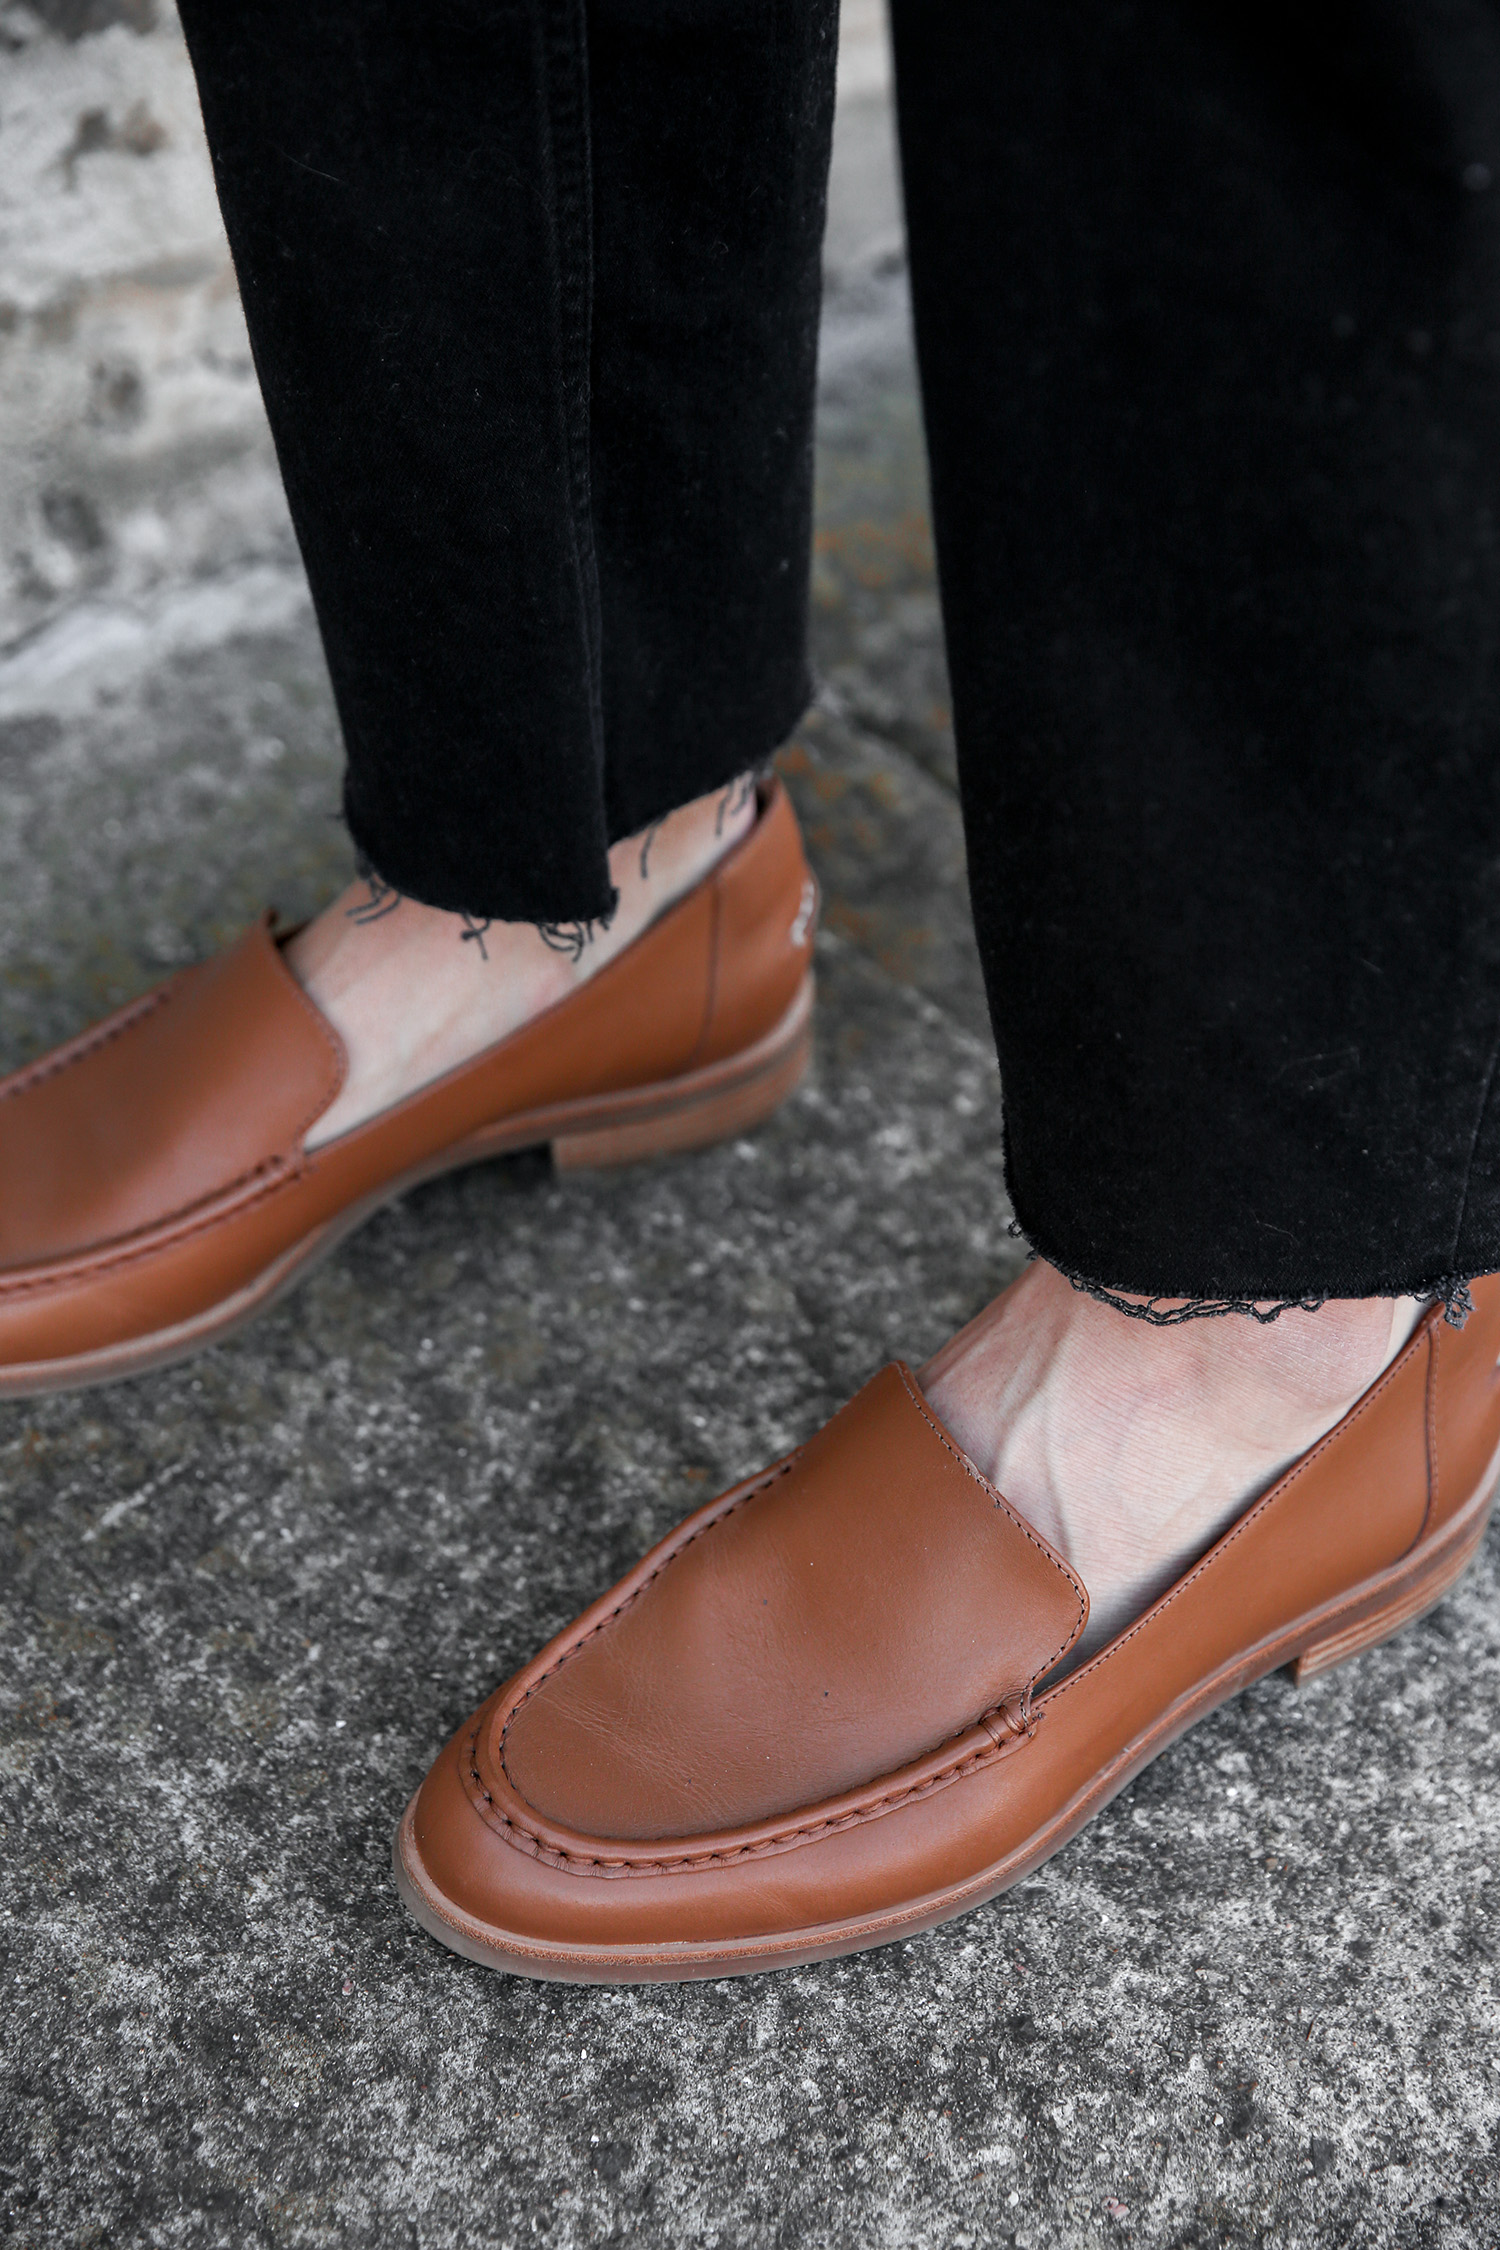 Everlane Modern Loafer Review 2.0 & How to Style Them - Mademoiselle ...